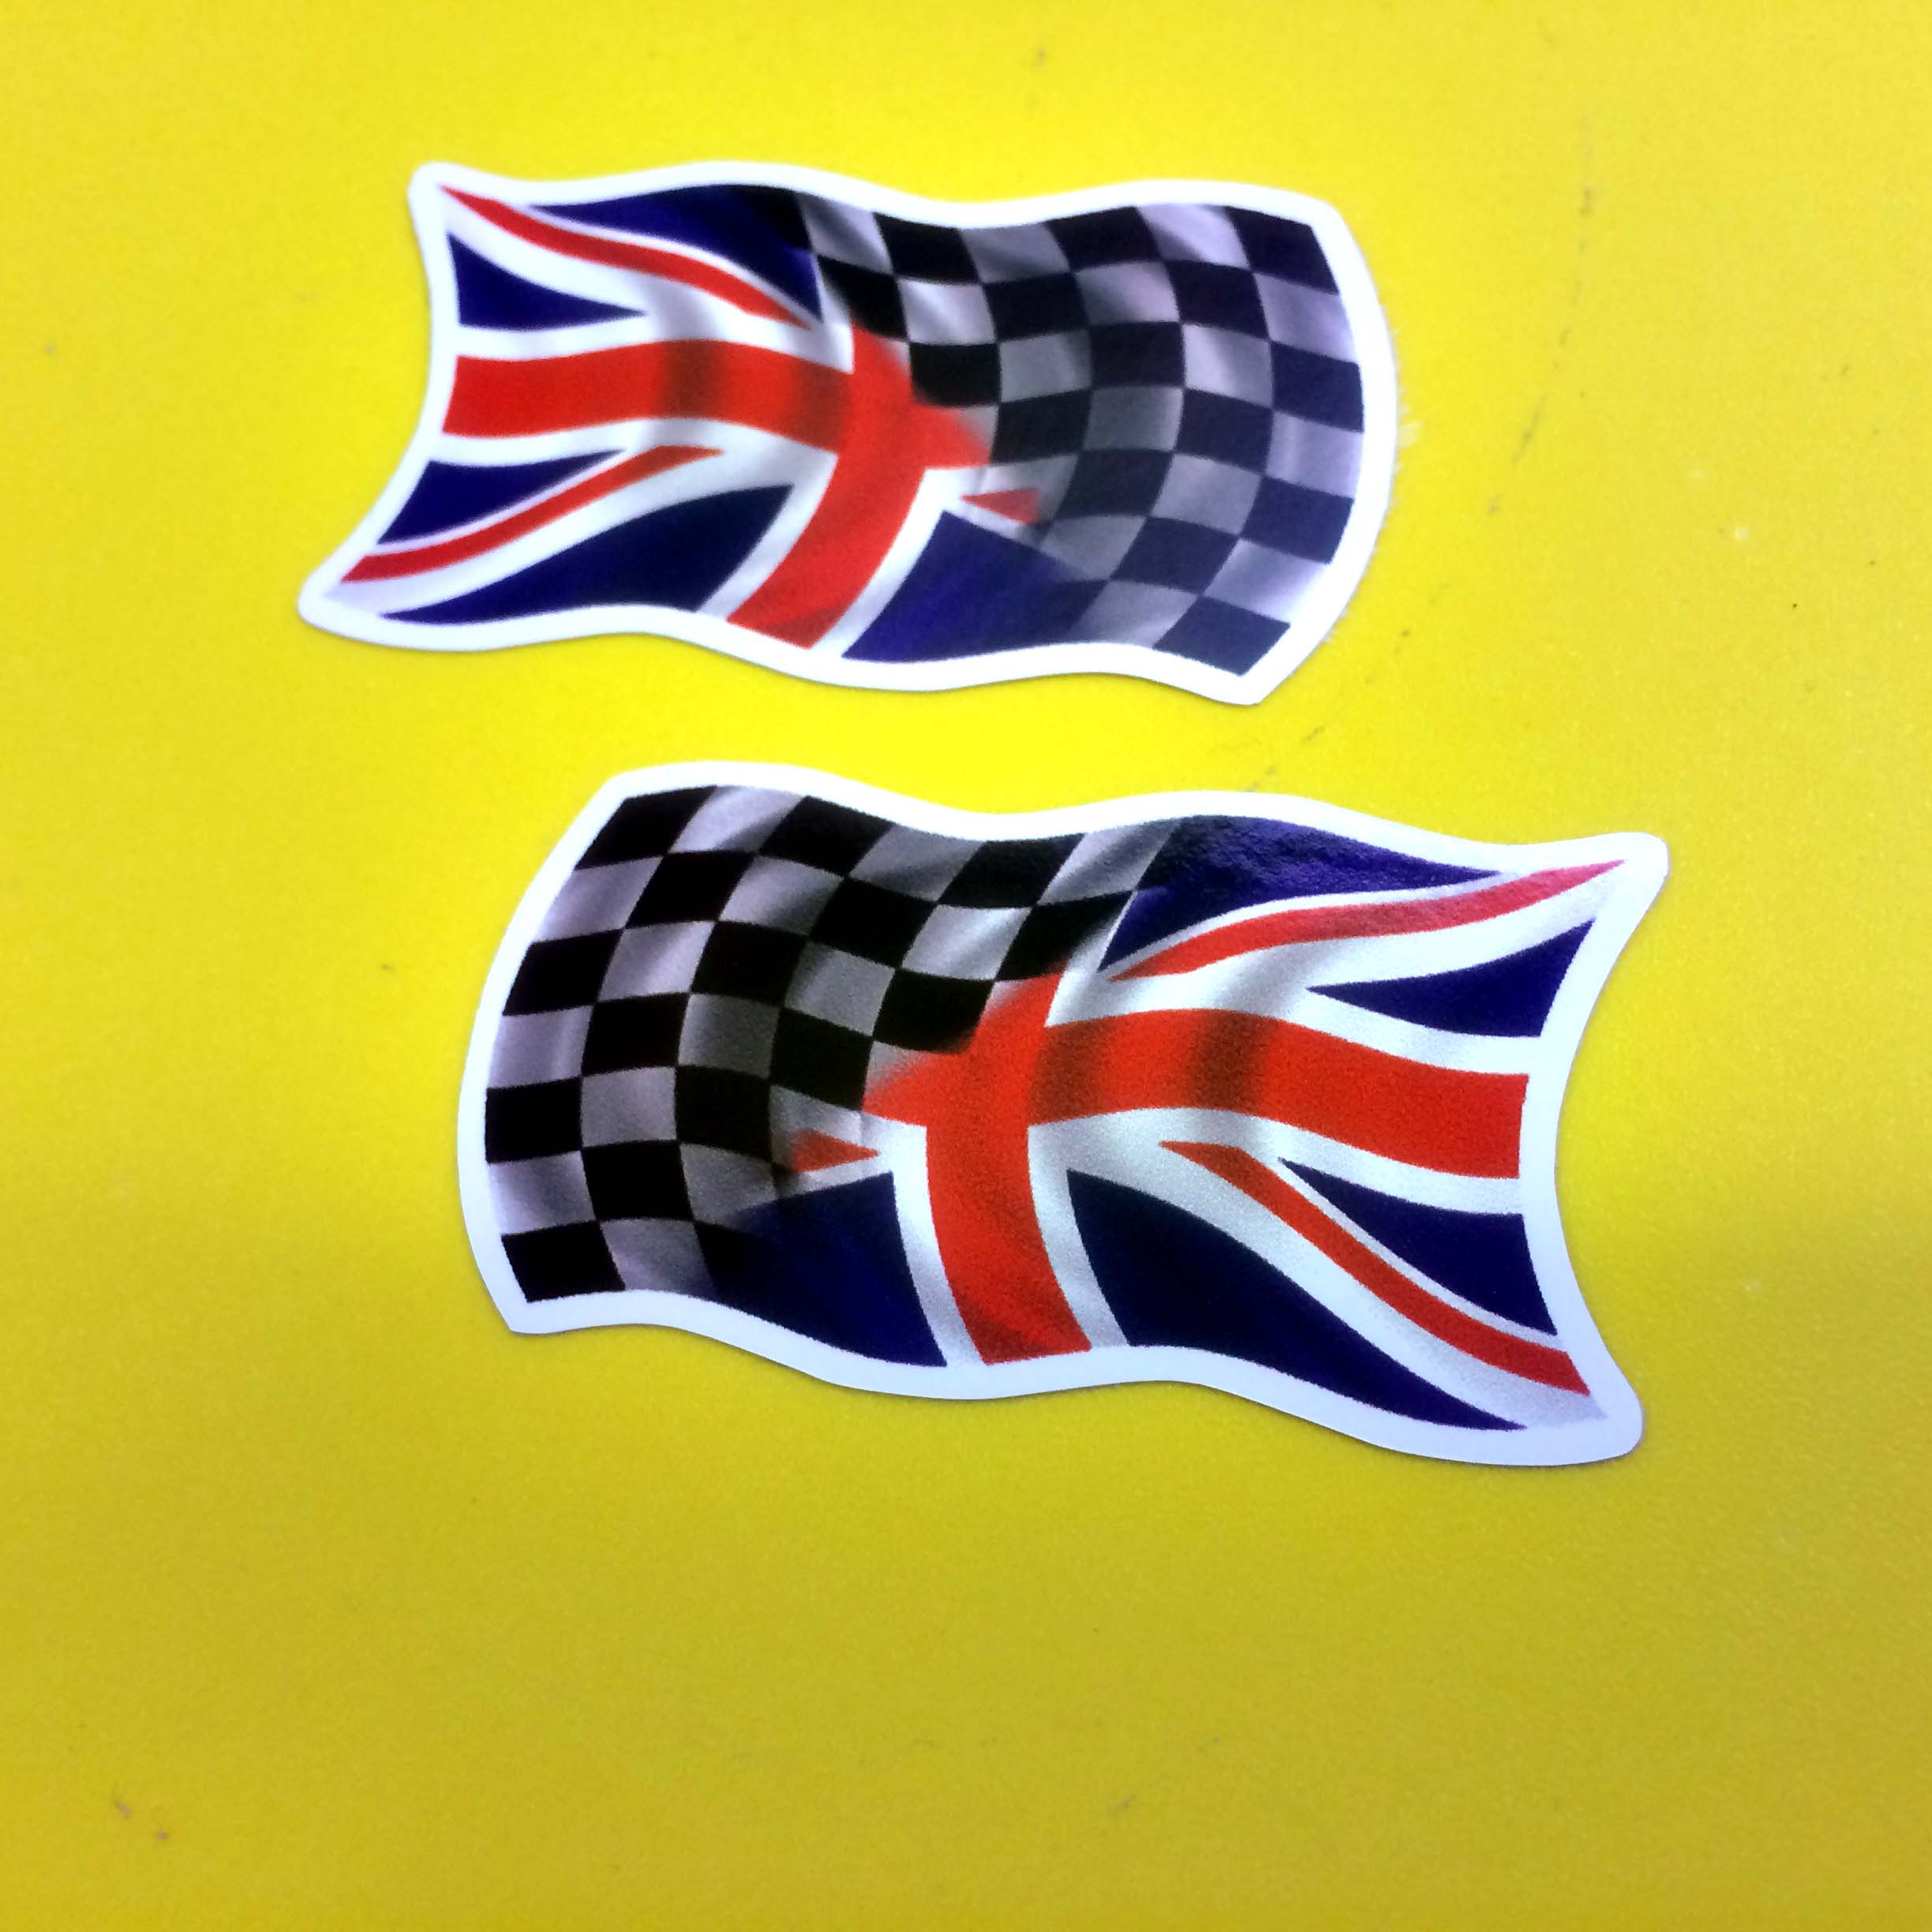 A wavy flag. One half is black and white chequer, the other half is the red, white and blue Union Jack.